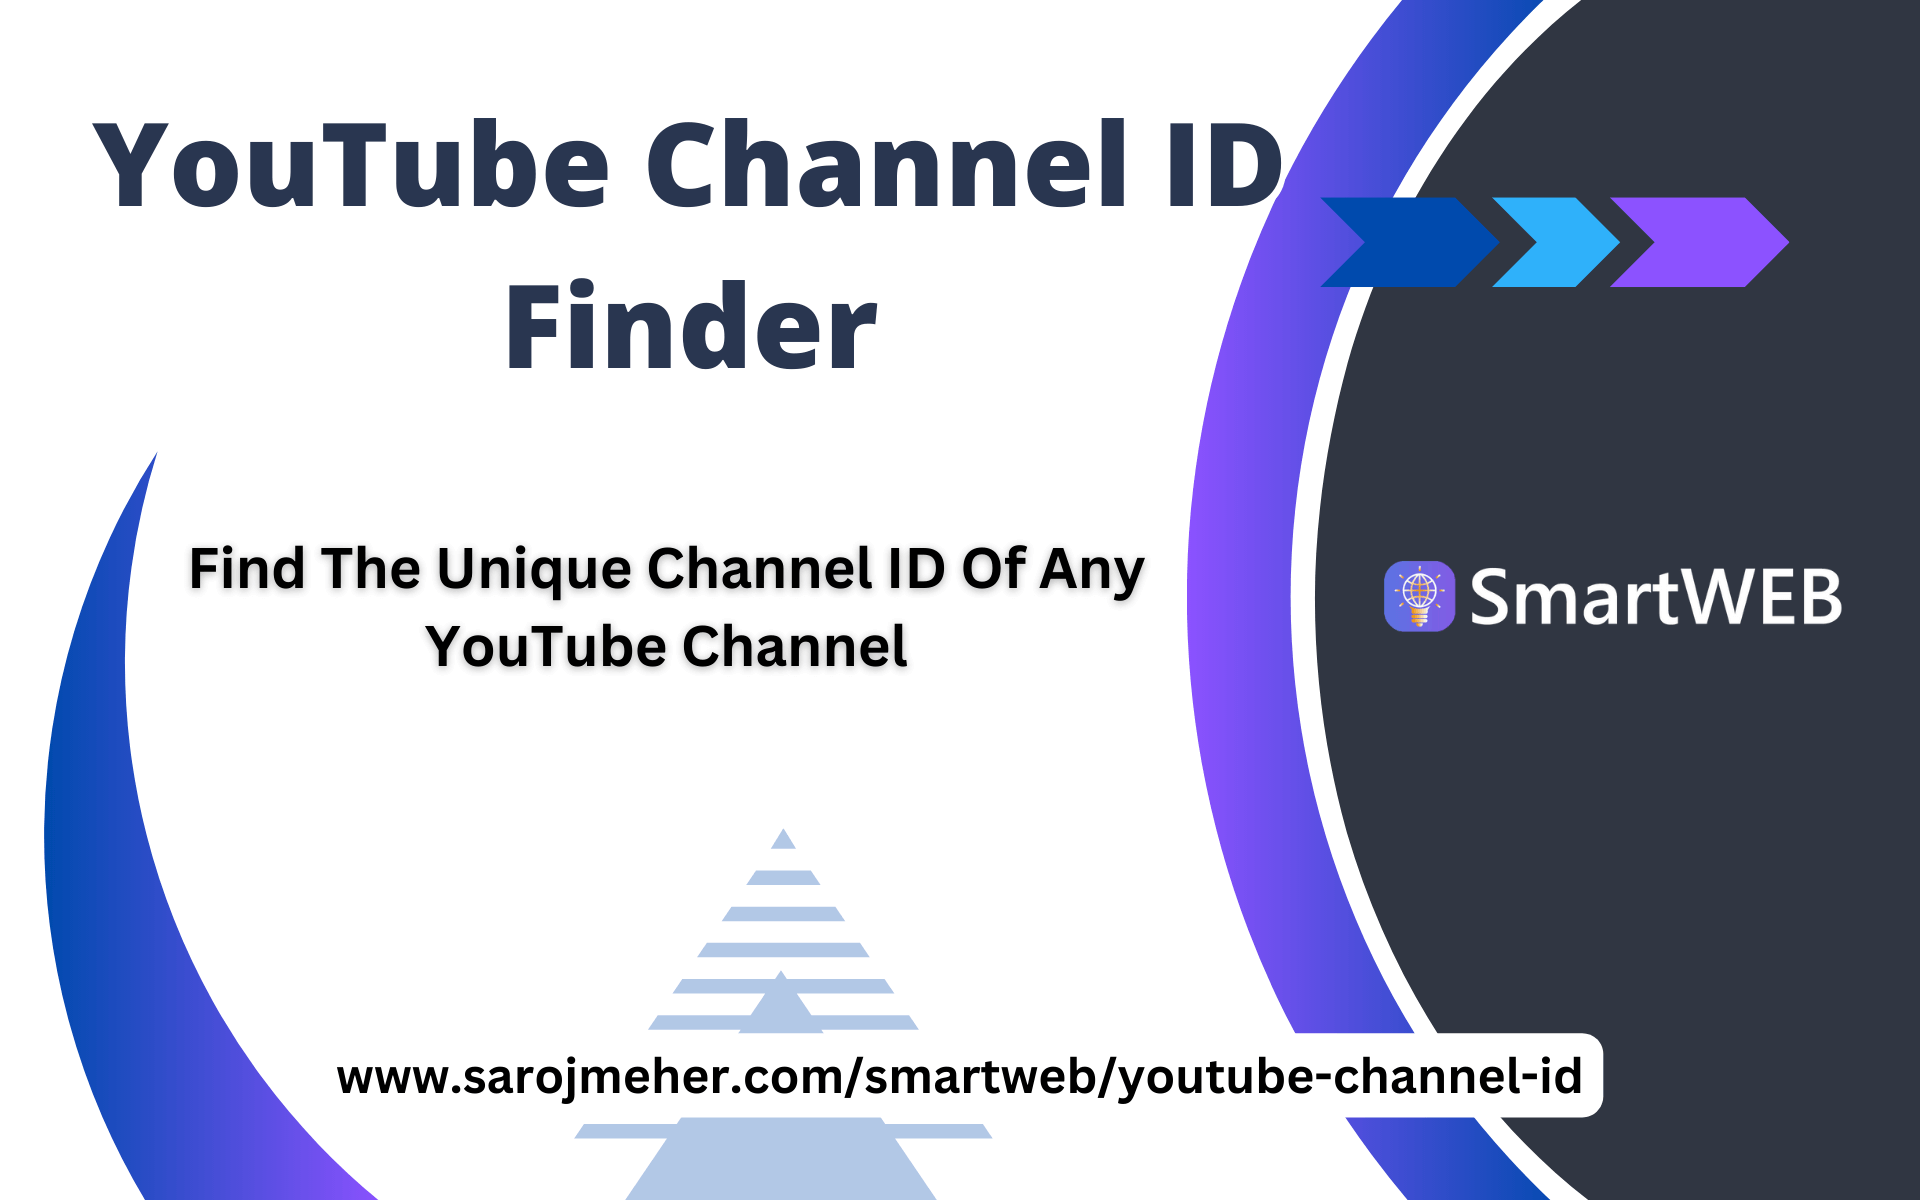 YouTube Channel ID Finder